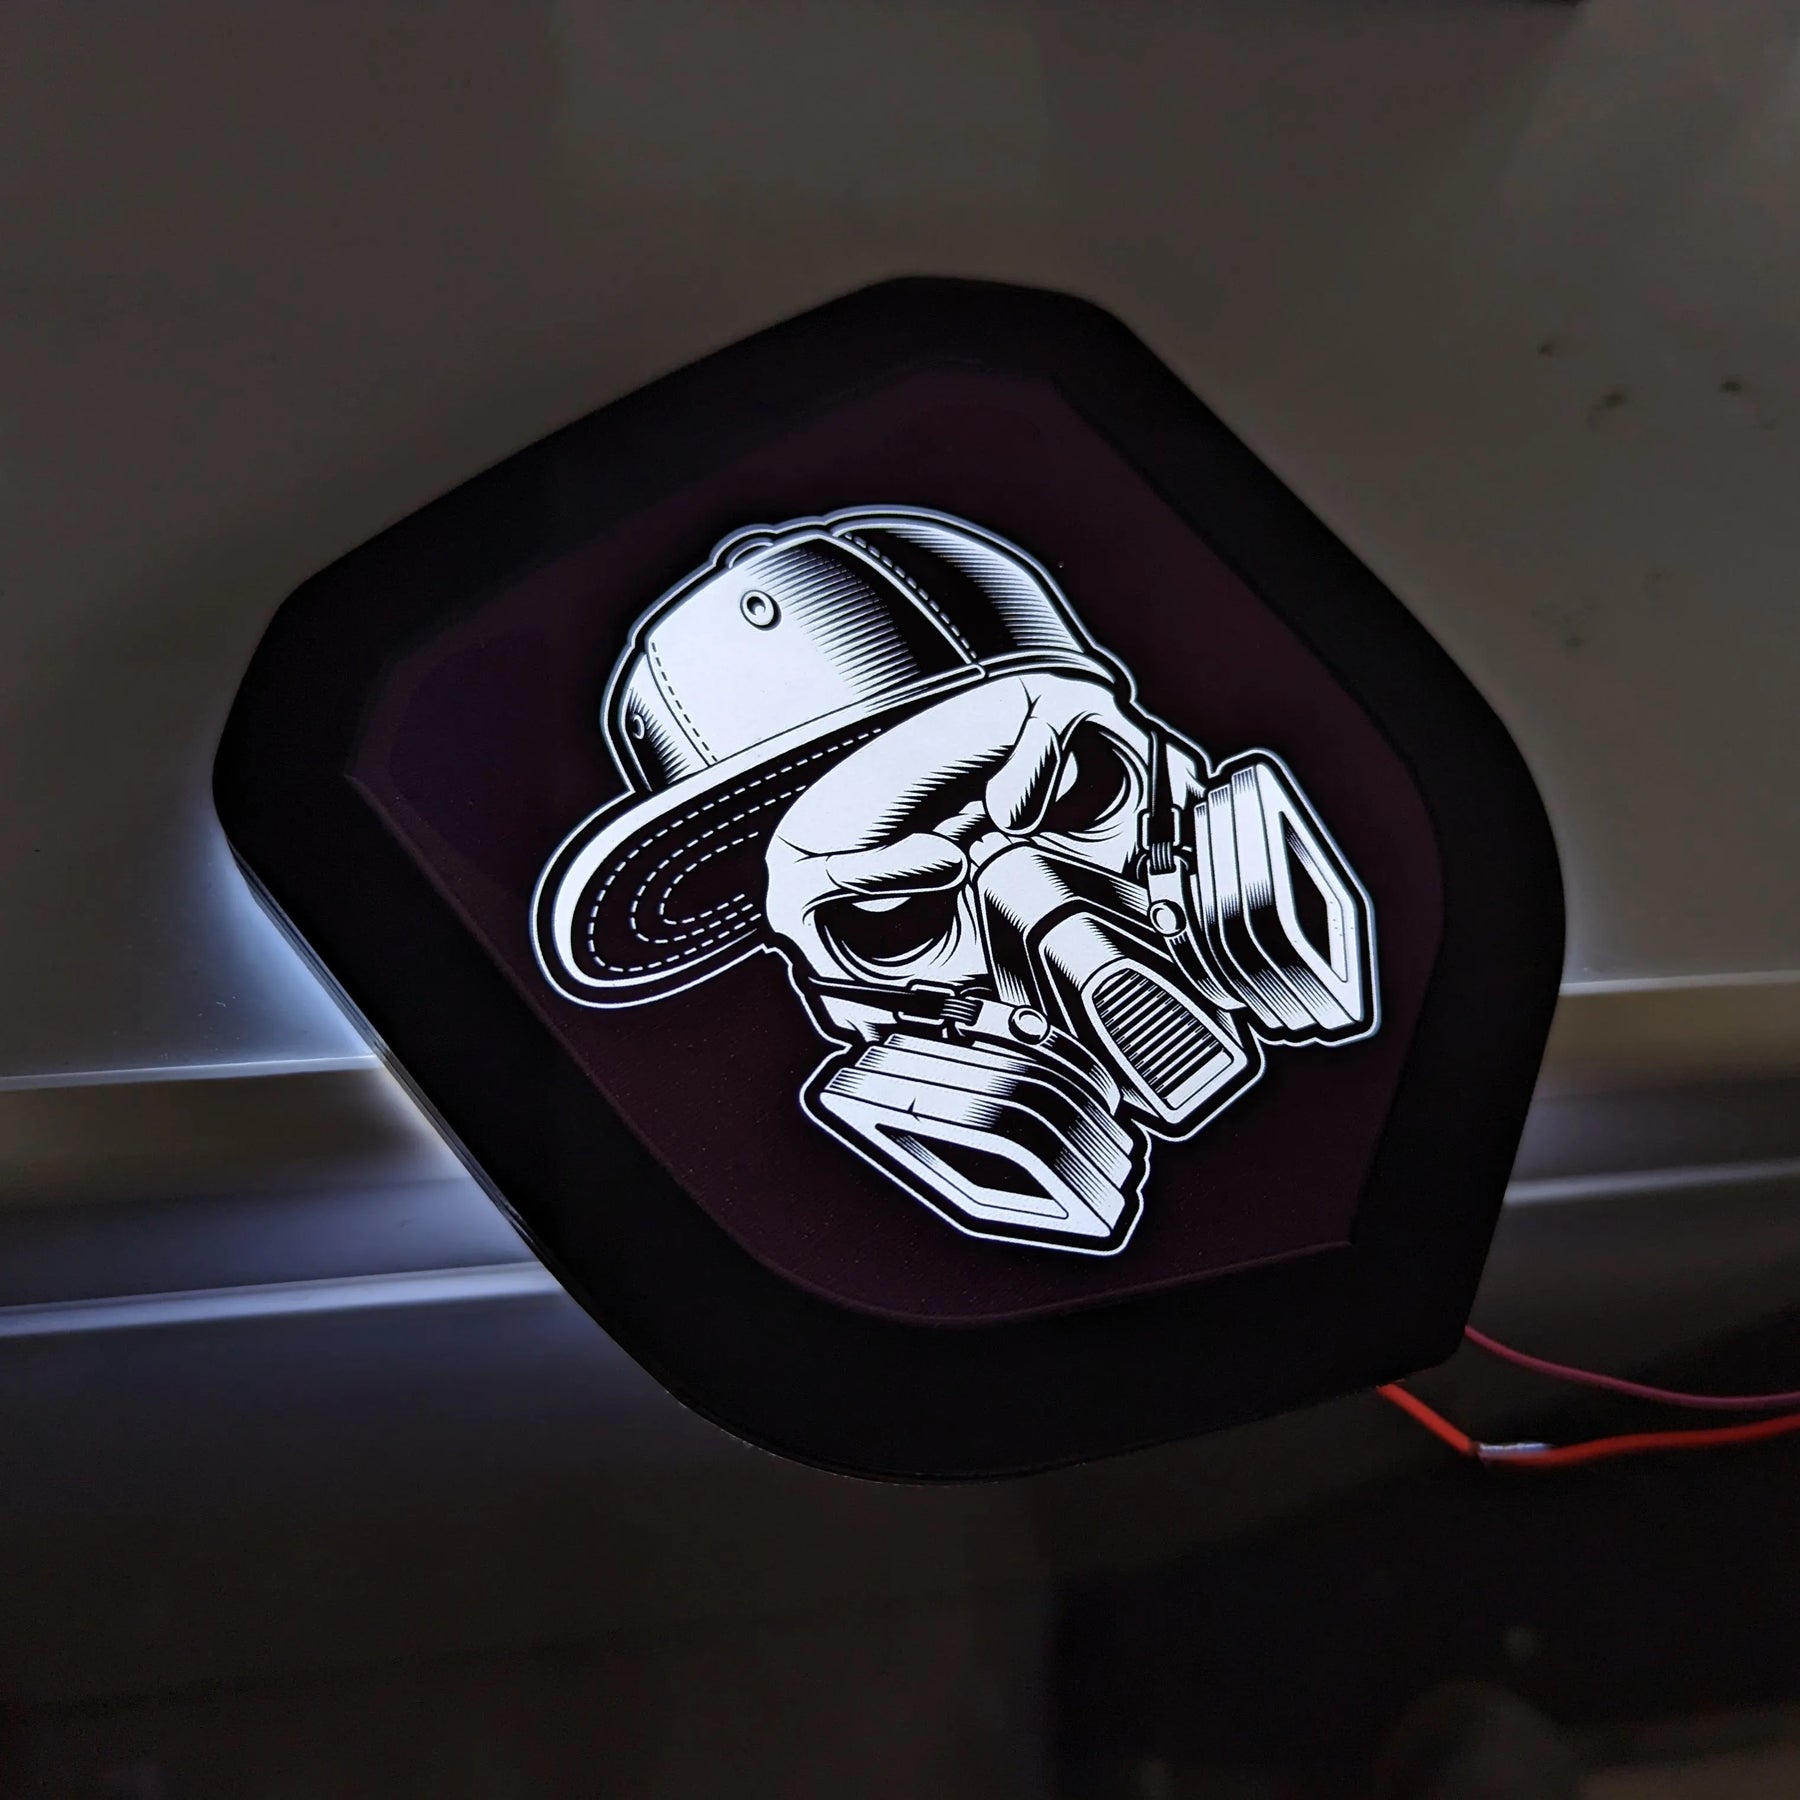 Full Color Custom LED Grille Badge - Fits 2013-2018 RAM® and 2019+ Classic Grille - 1500, 2500, 3500